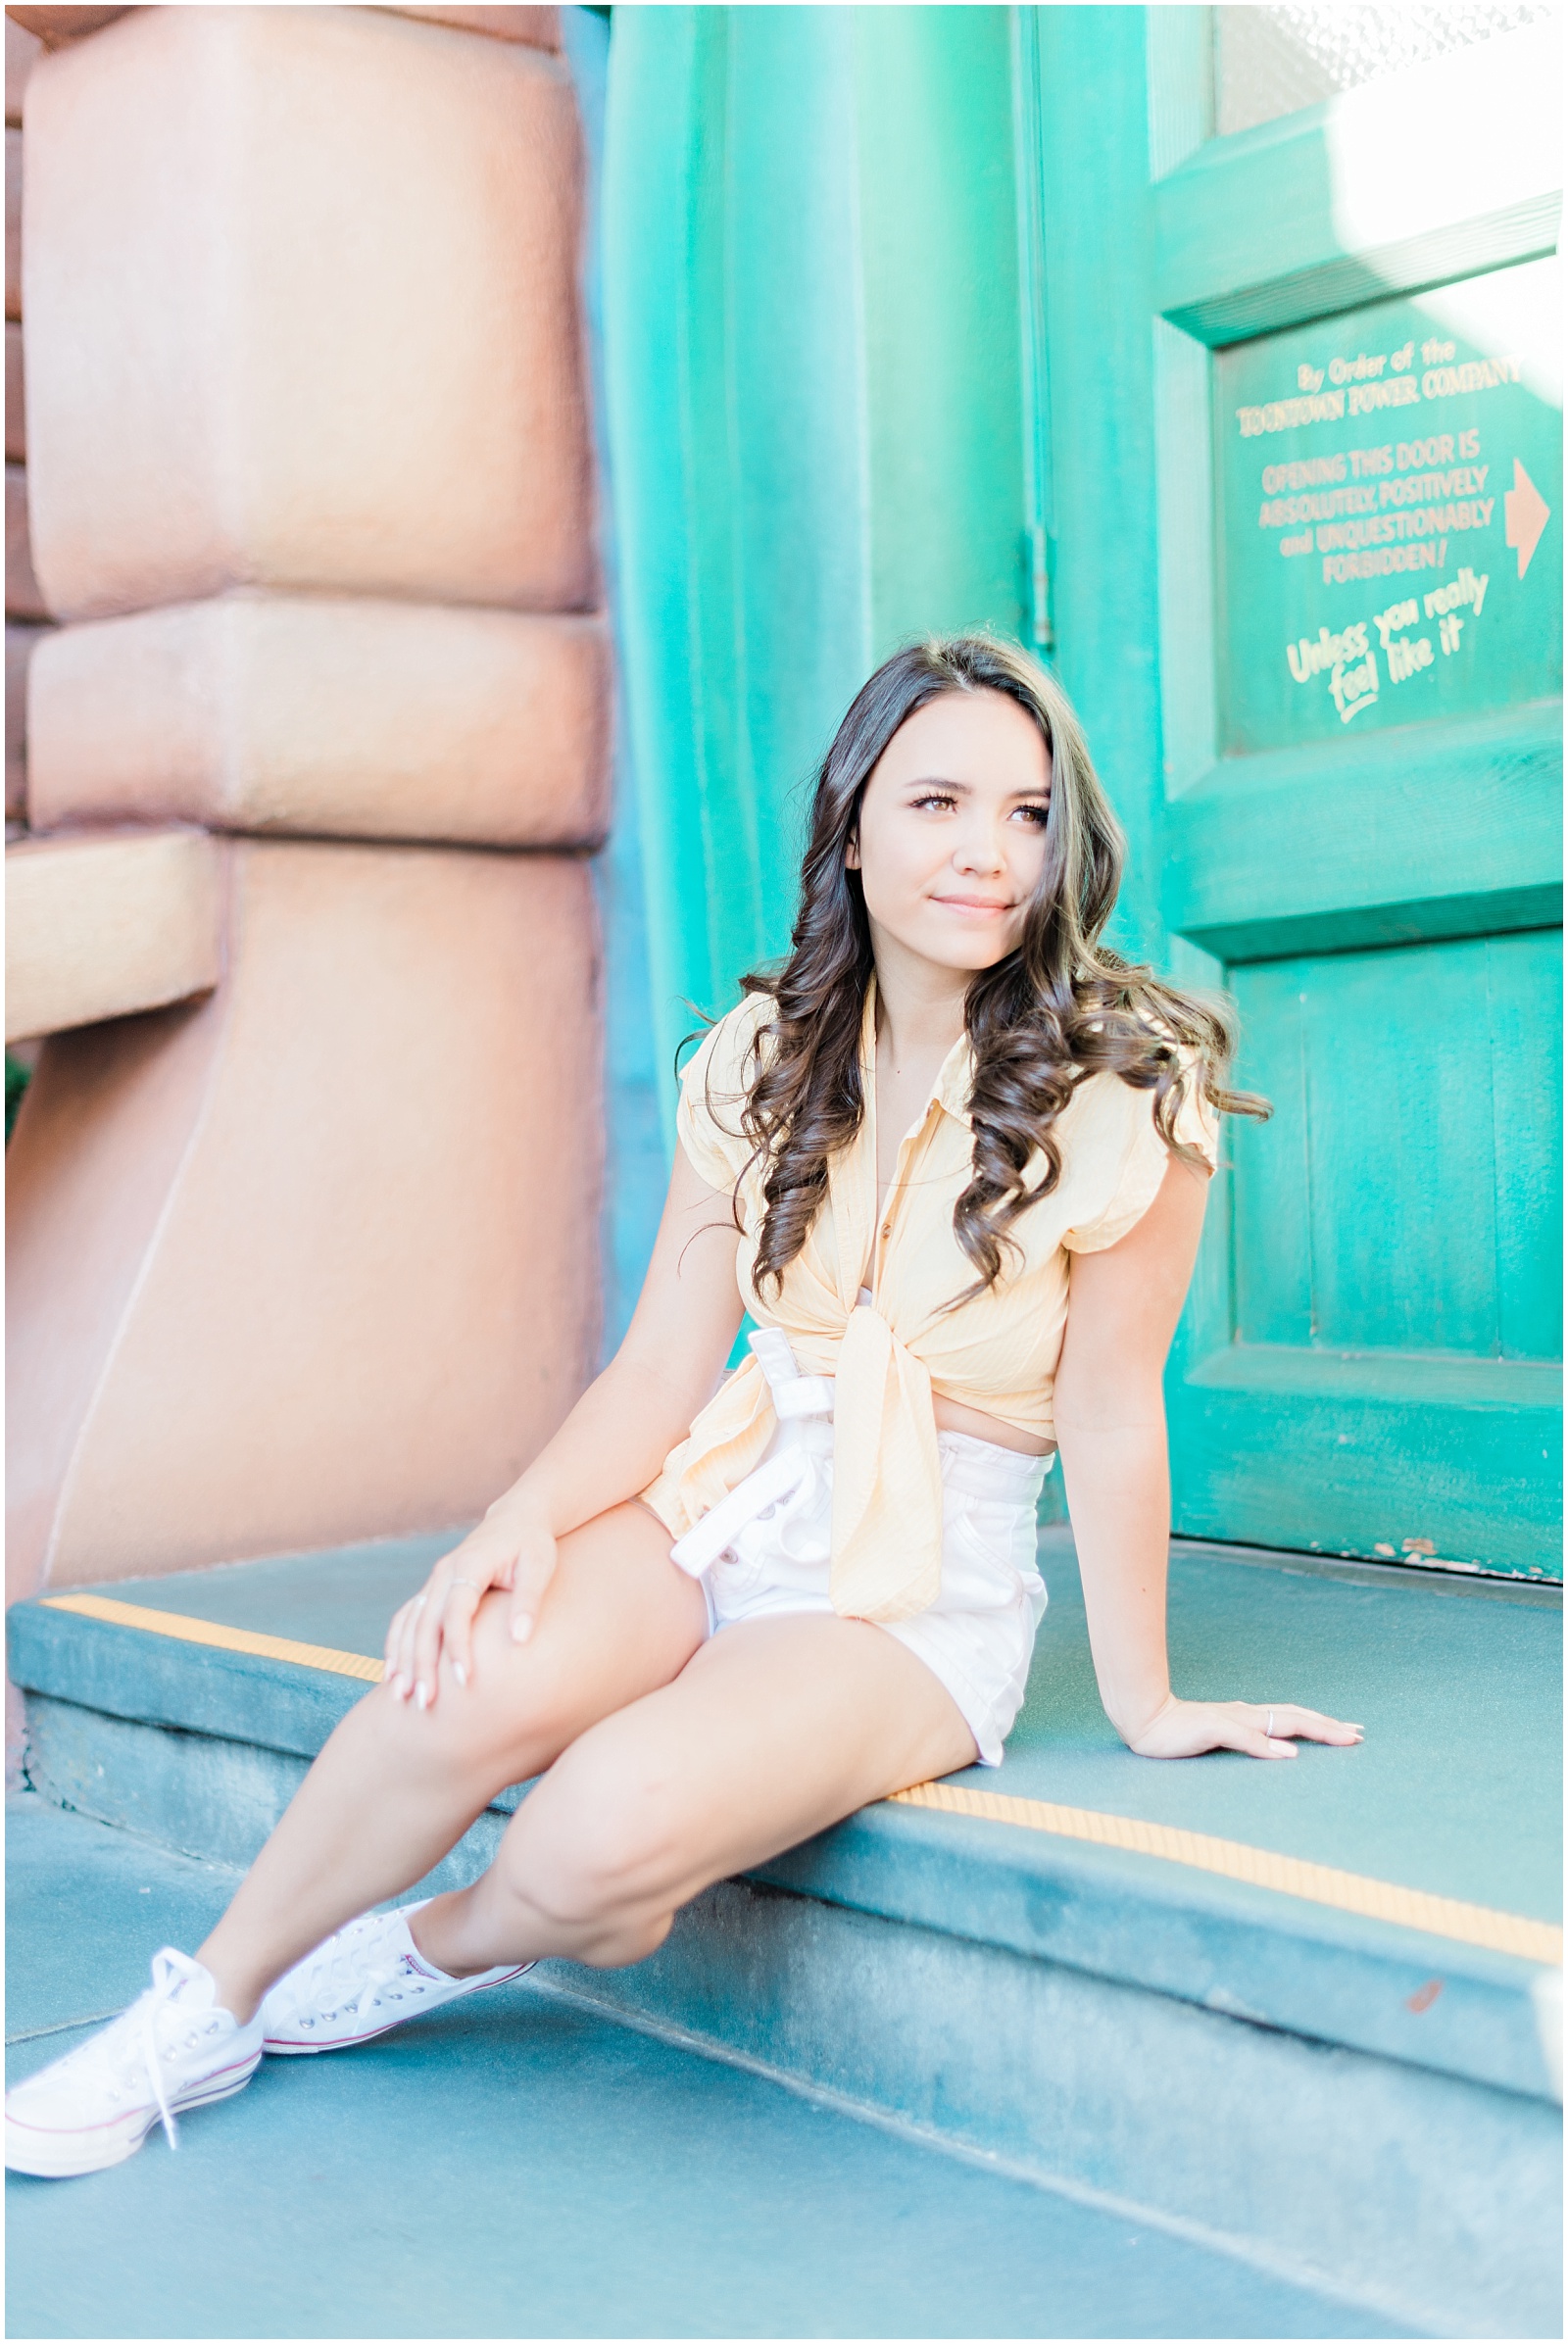 Disneyland ToonTown Senior Session. Images by Mollie Jane Photography. To see more go to www.molliejanephotography.com.